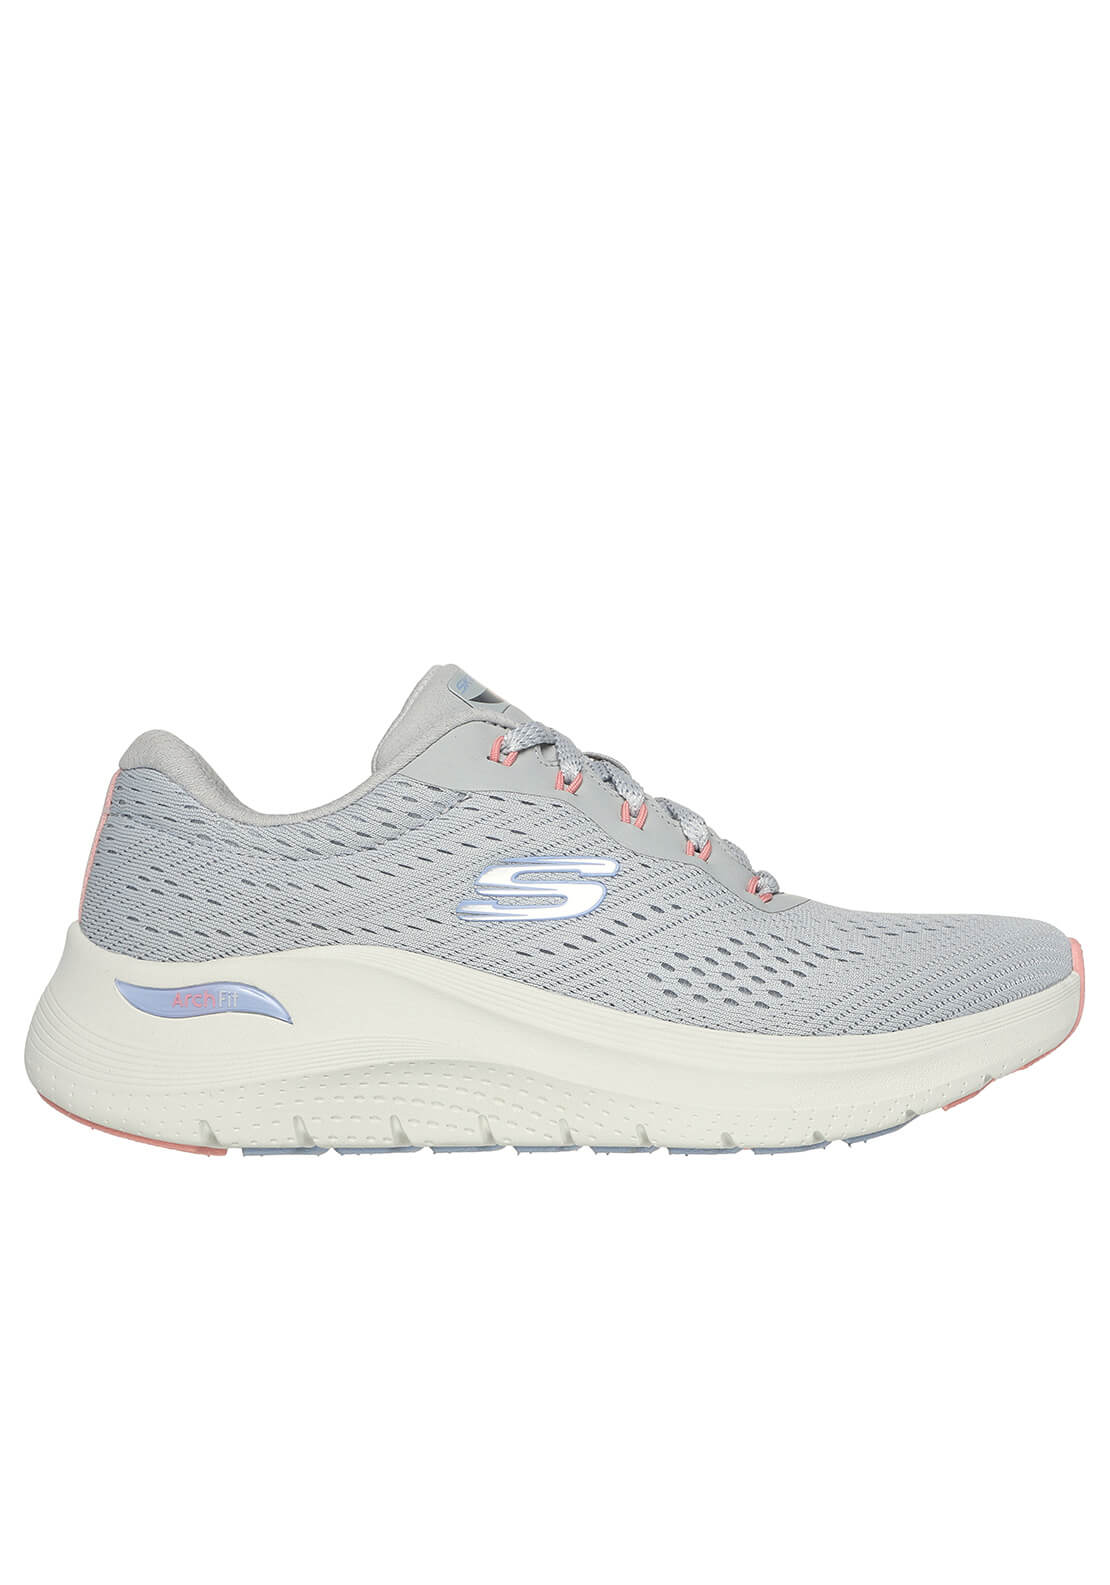 Skechers Arch Fit 2.0 Big League - Grey 3 Shaws Department Stores